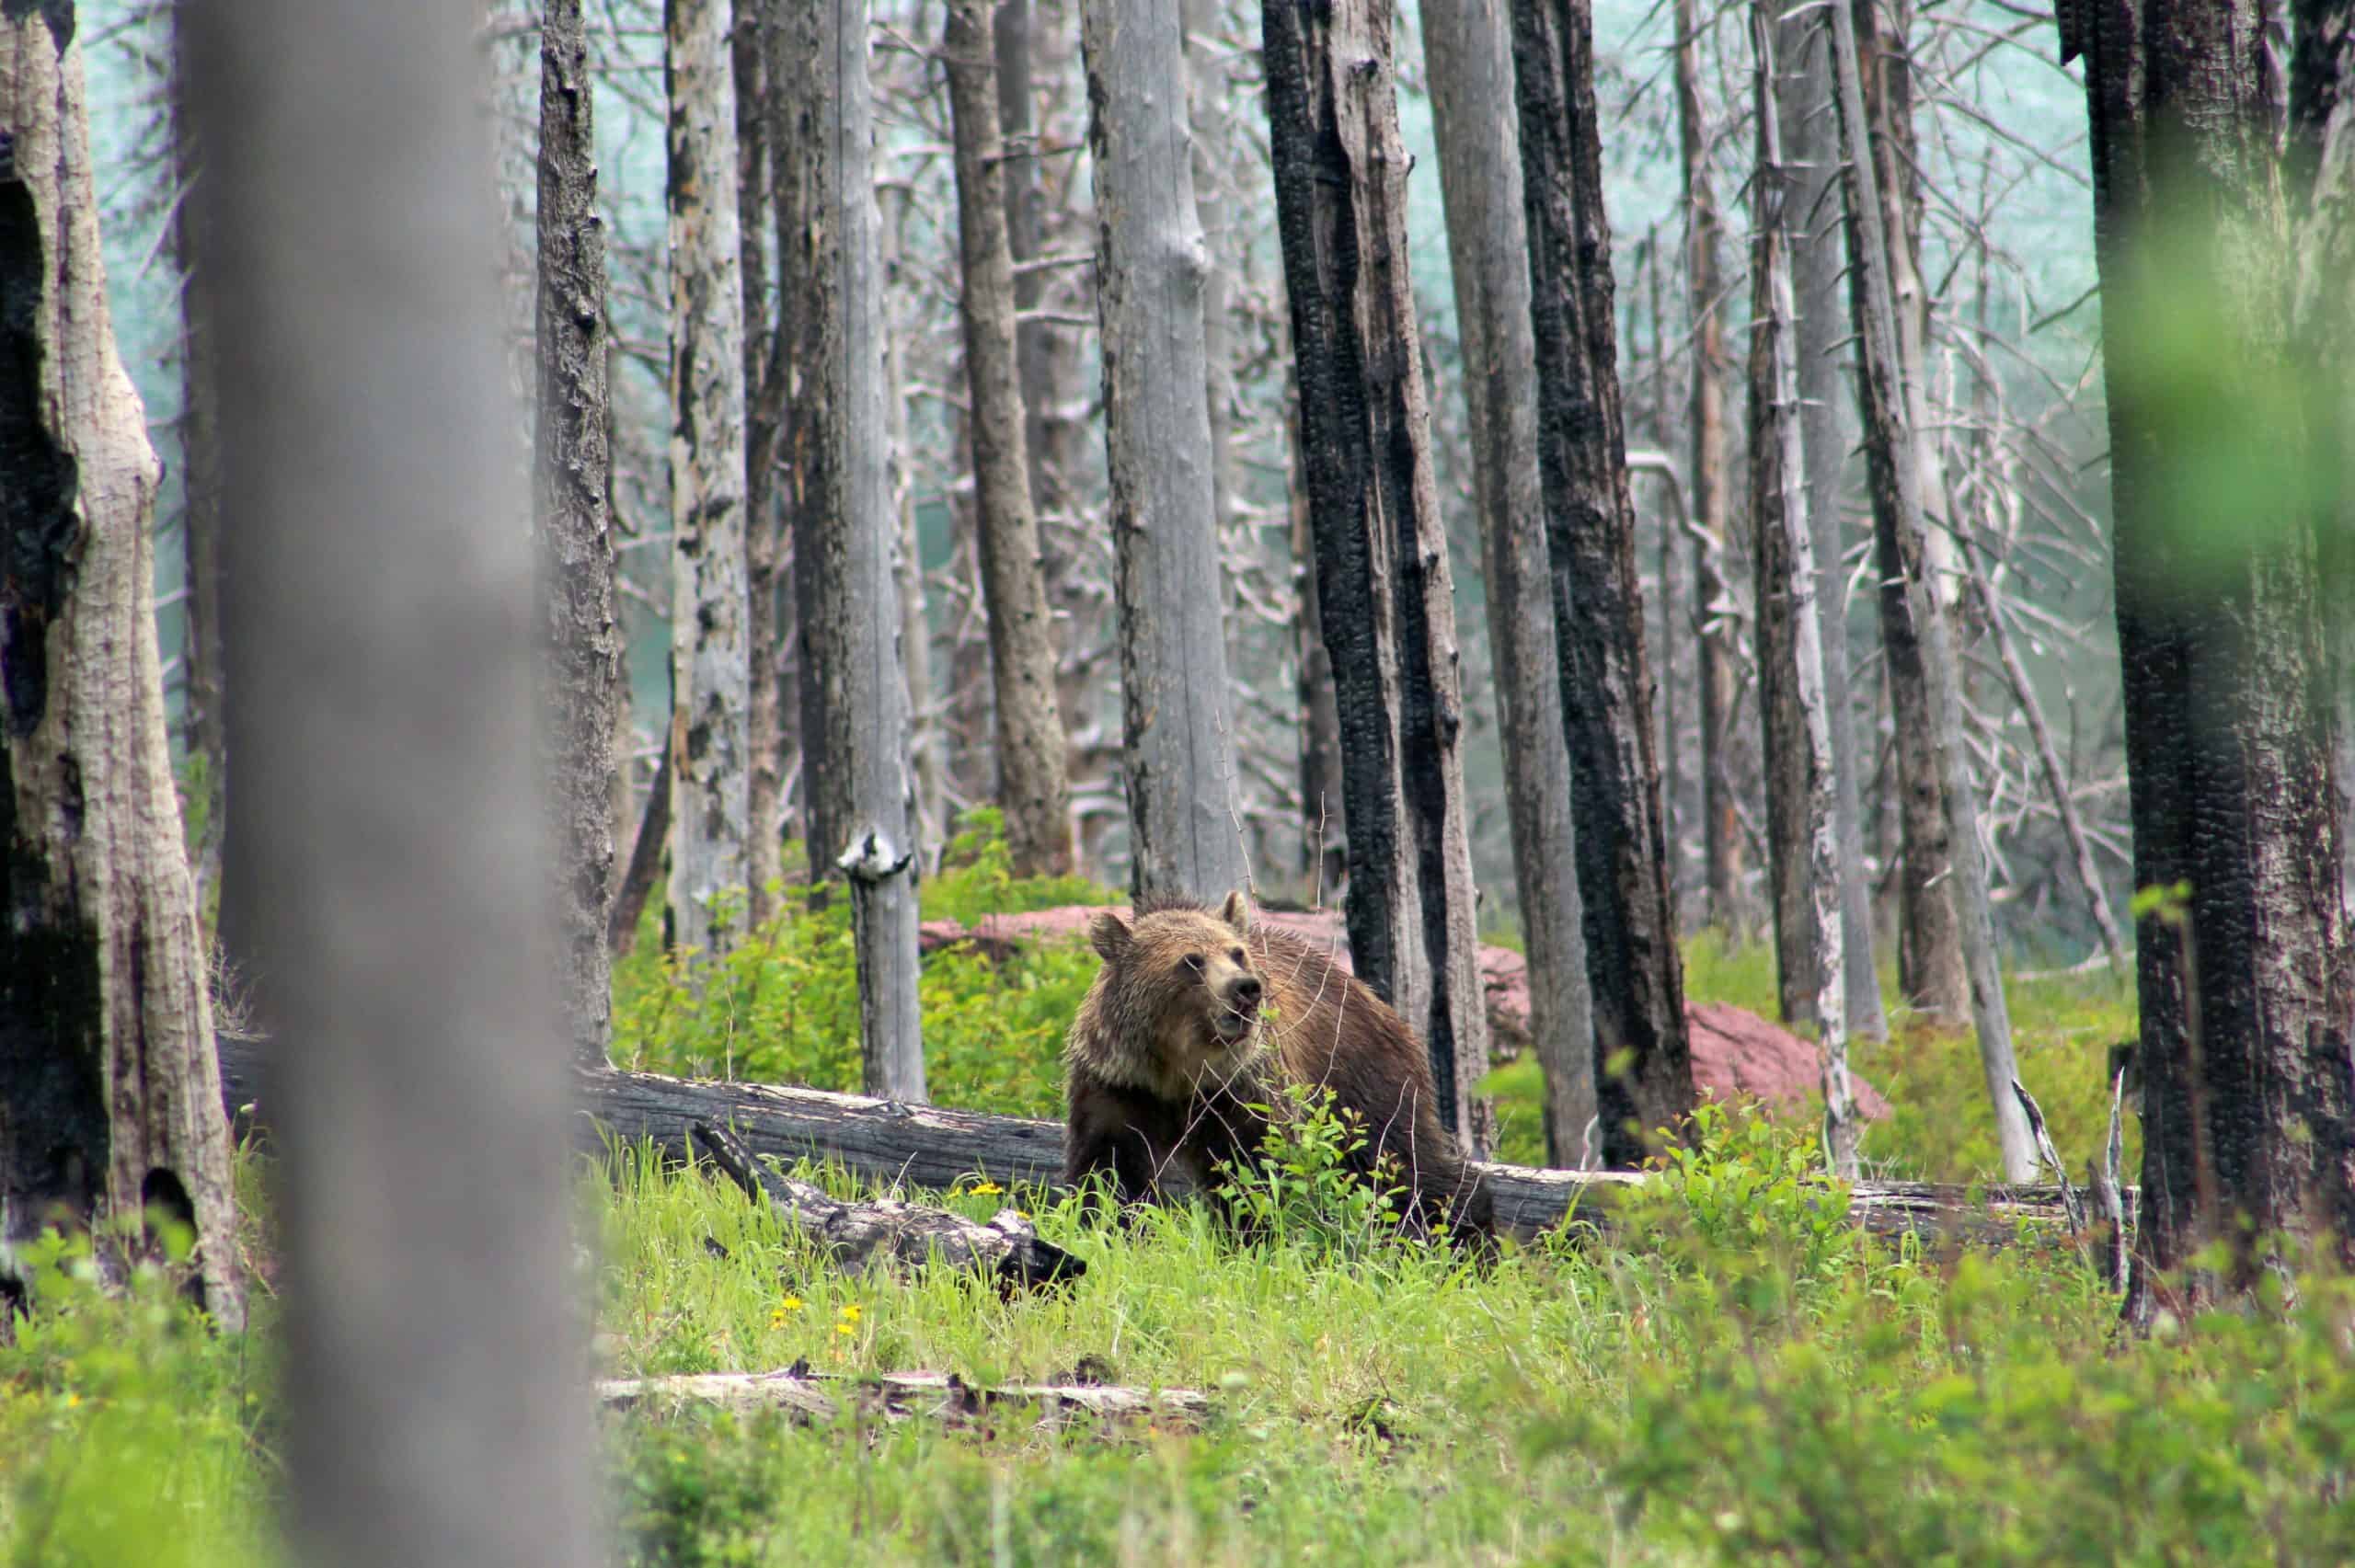 Grizzly bear in Glacier National Park